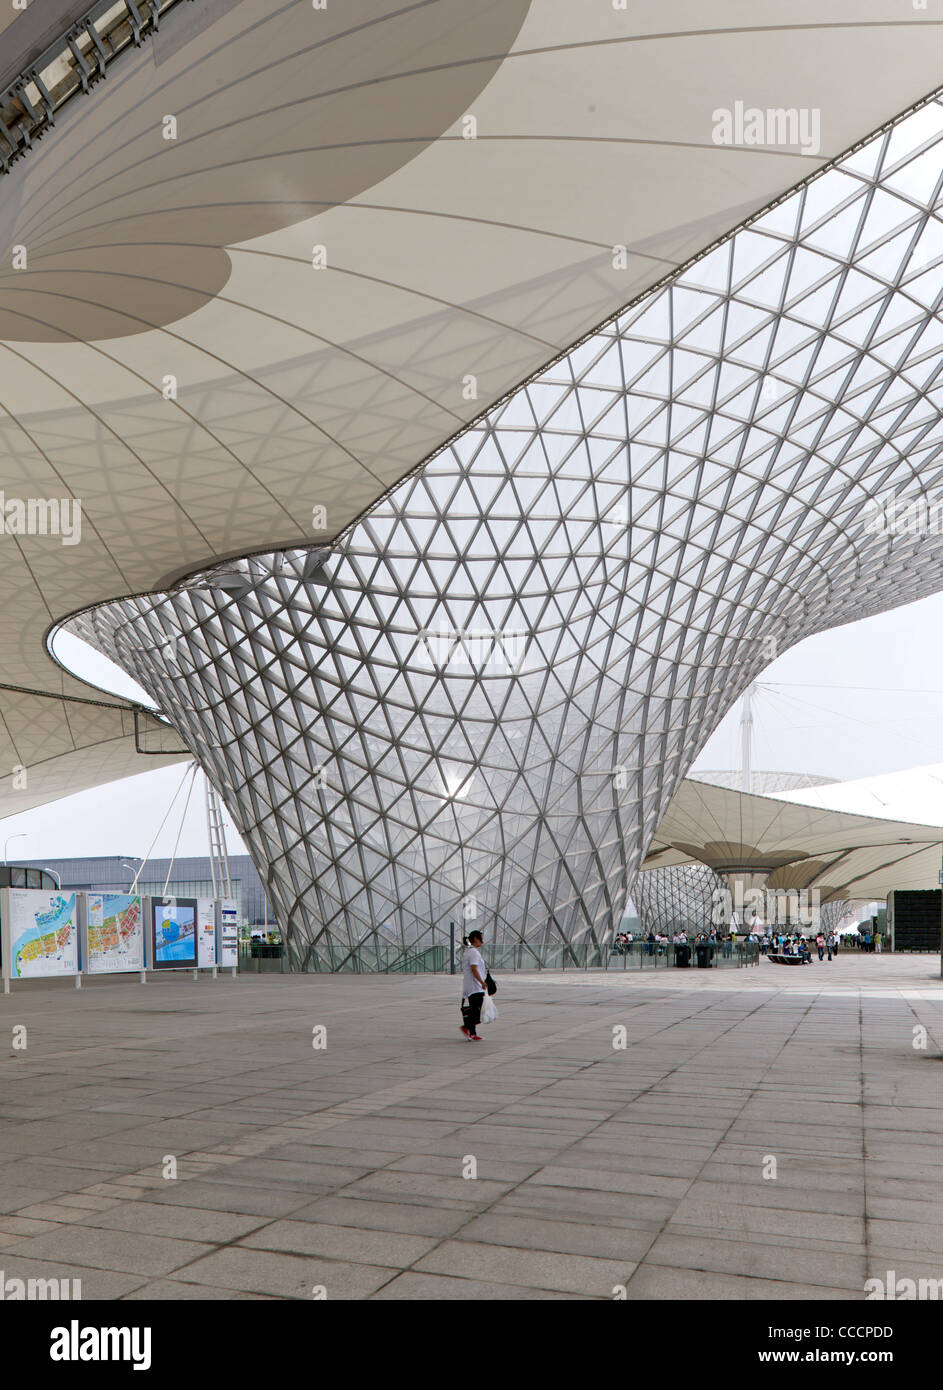 The Main Building - Called Expo Axis - Has The World''S Largest Membrane Construction And Was Built By Sba (Architects) And Stock Photo